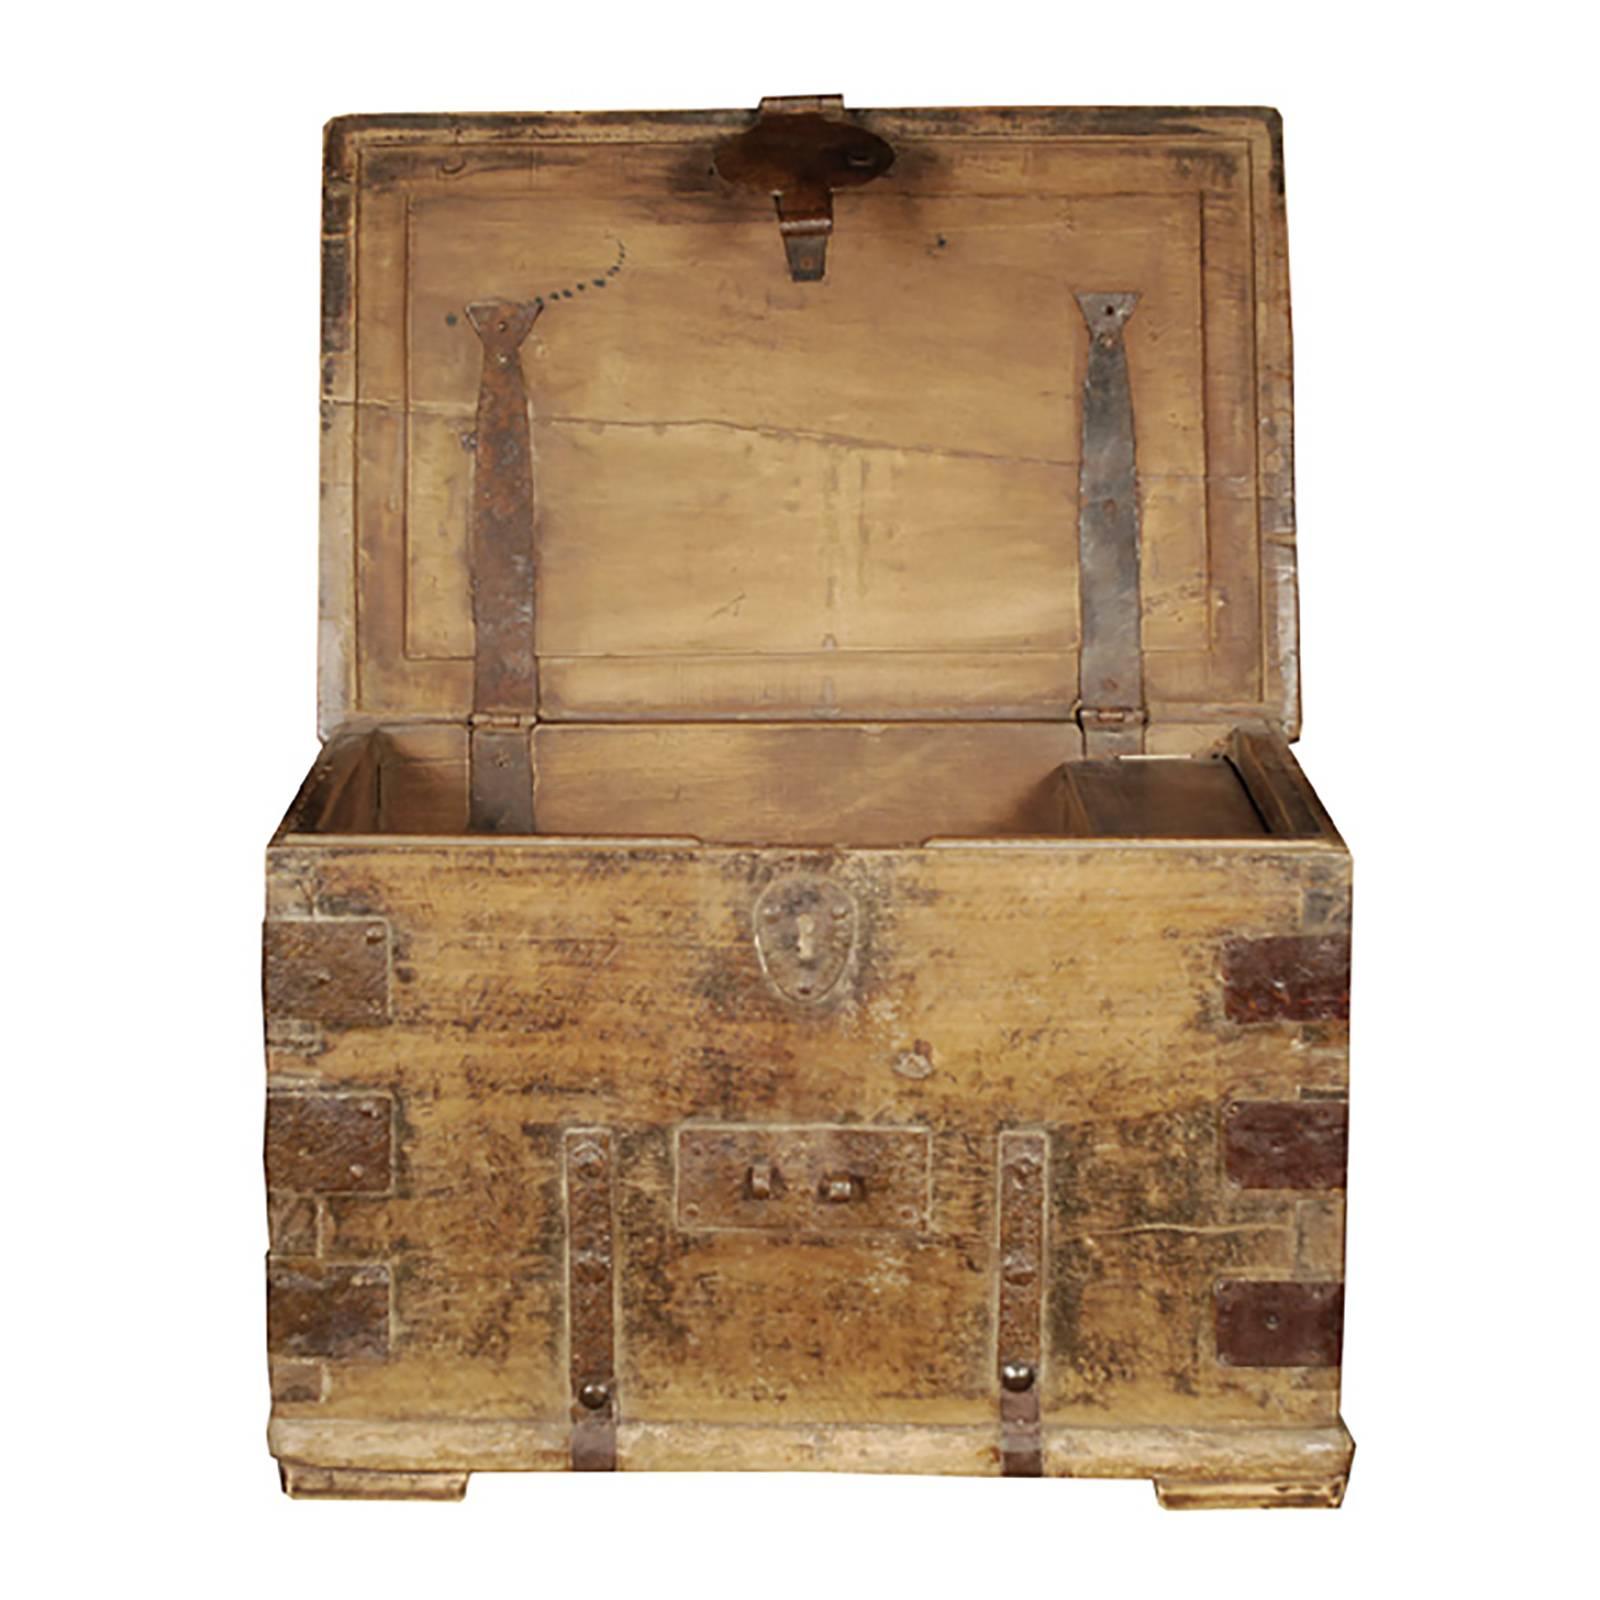 This wonderfully textured early 19th century keeper's chest is from Shanxi Province, China. The original hand-forged iron hardware was designed exclusively for function, but we love the way it beautifully punctuates the simple form of the footed